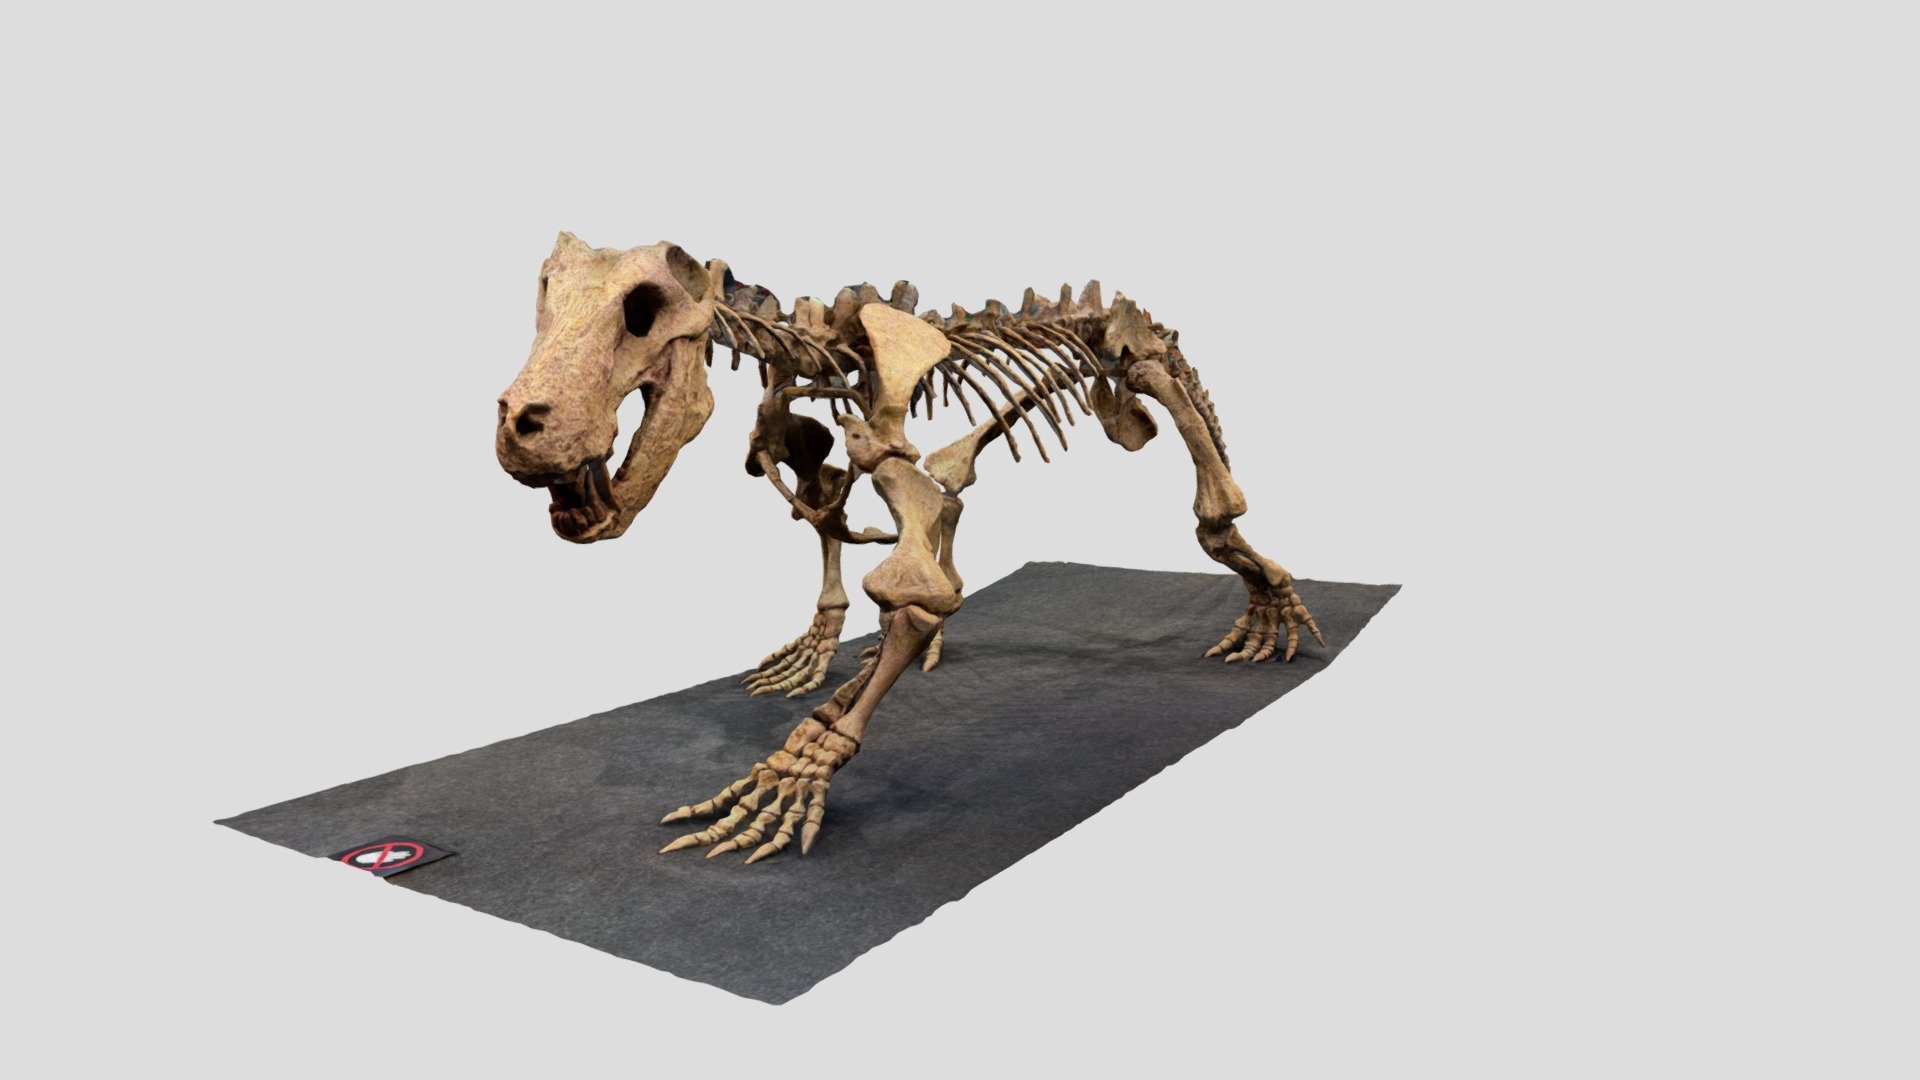 Photo scan of a Inostrancevia fossil cast located in the Melbourne Museum, Australia

Created with Polycam - Inostrancevia Dinosaur fossil cast - 3D model by monoganog 3d model